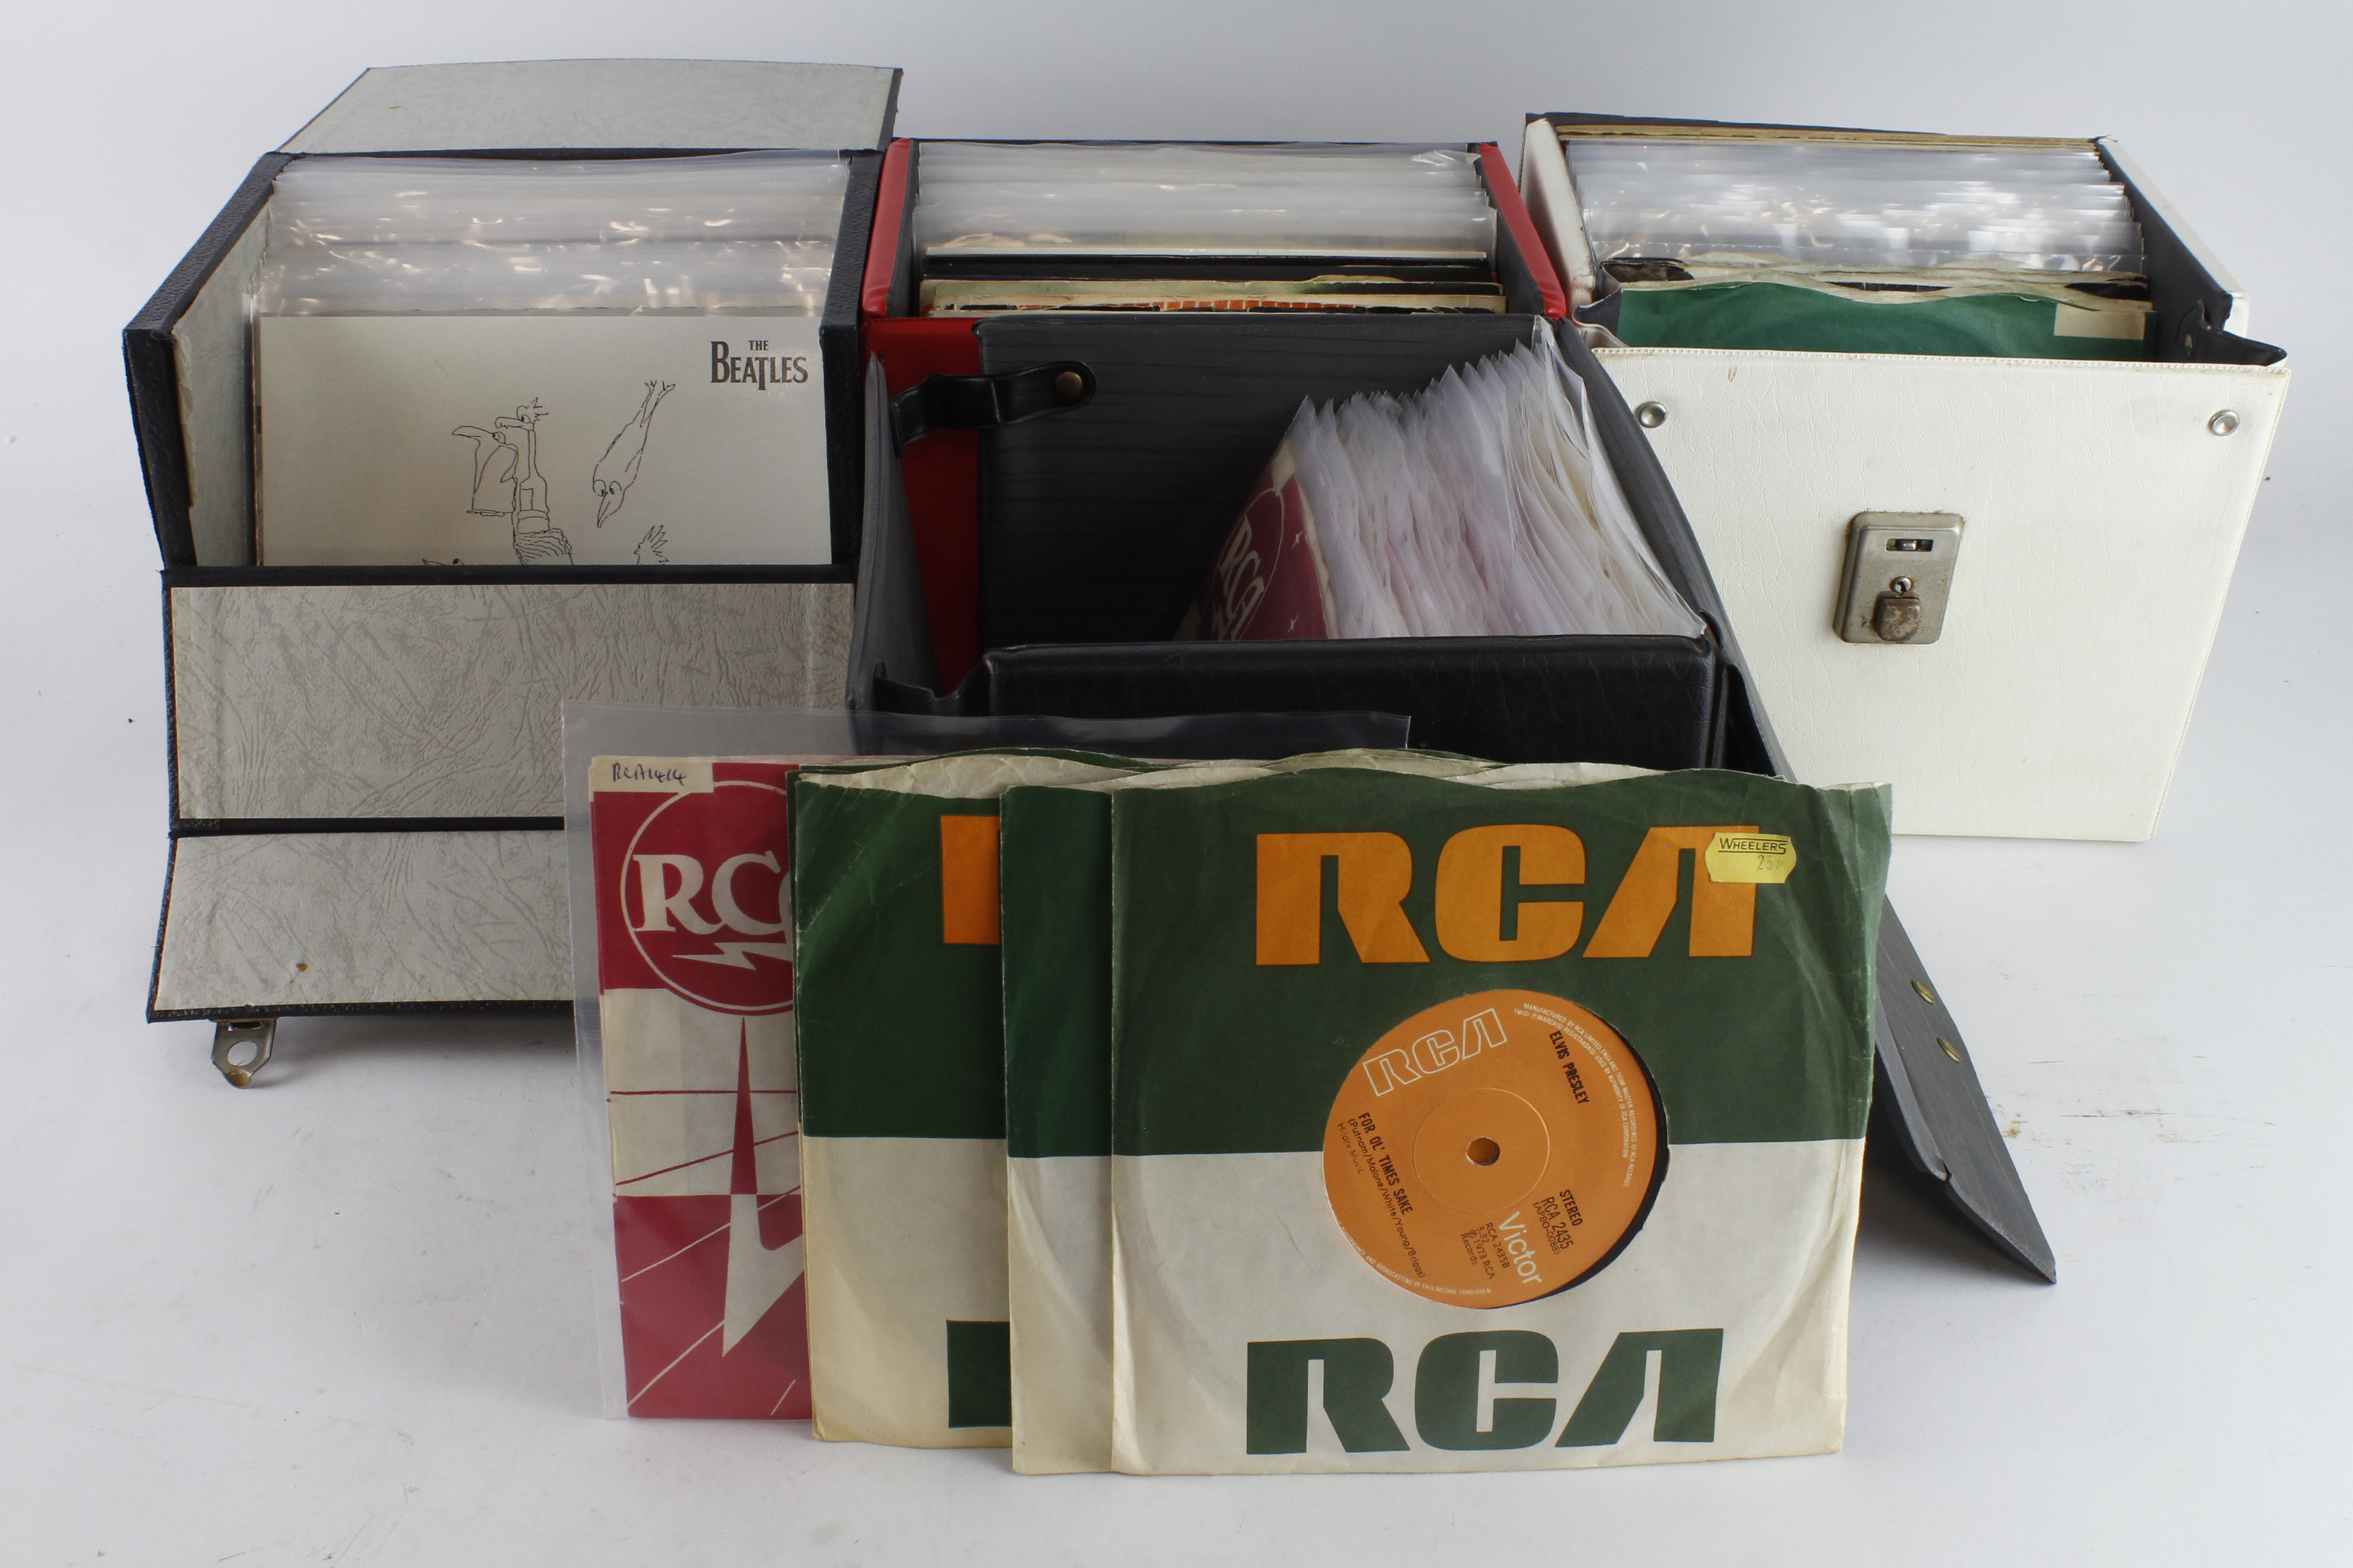 Records. Four cases of 45 single records, artists include Beatles, Elvis Presley, Rolling Stones,